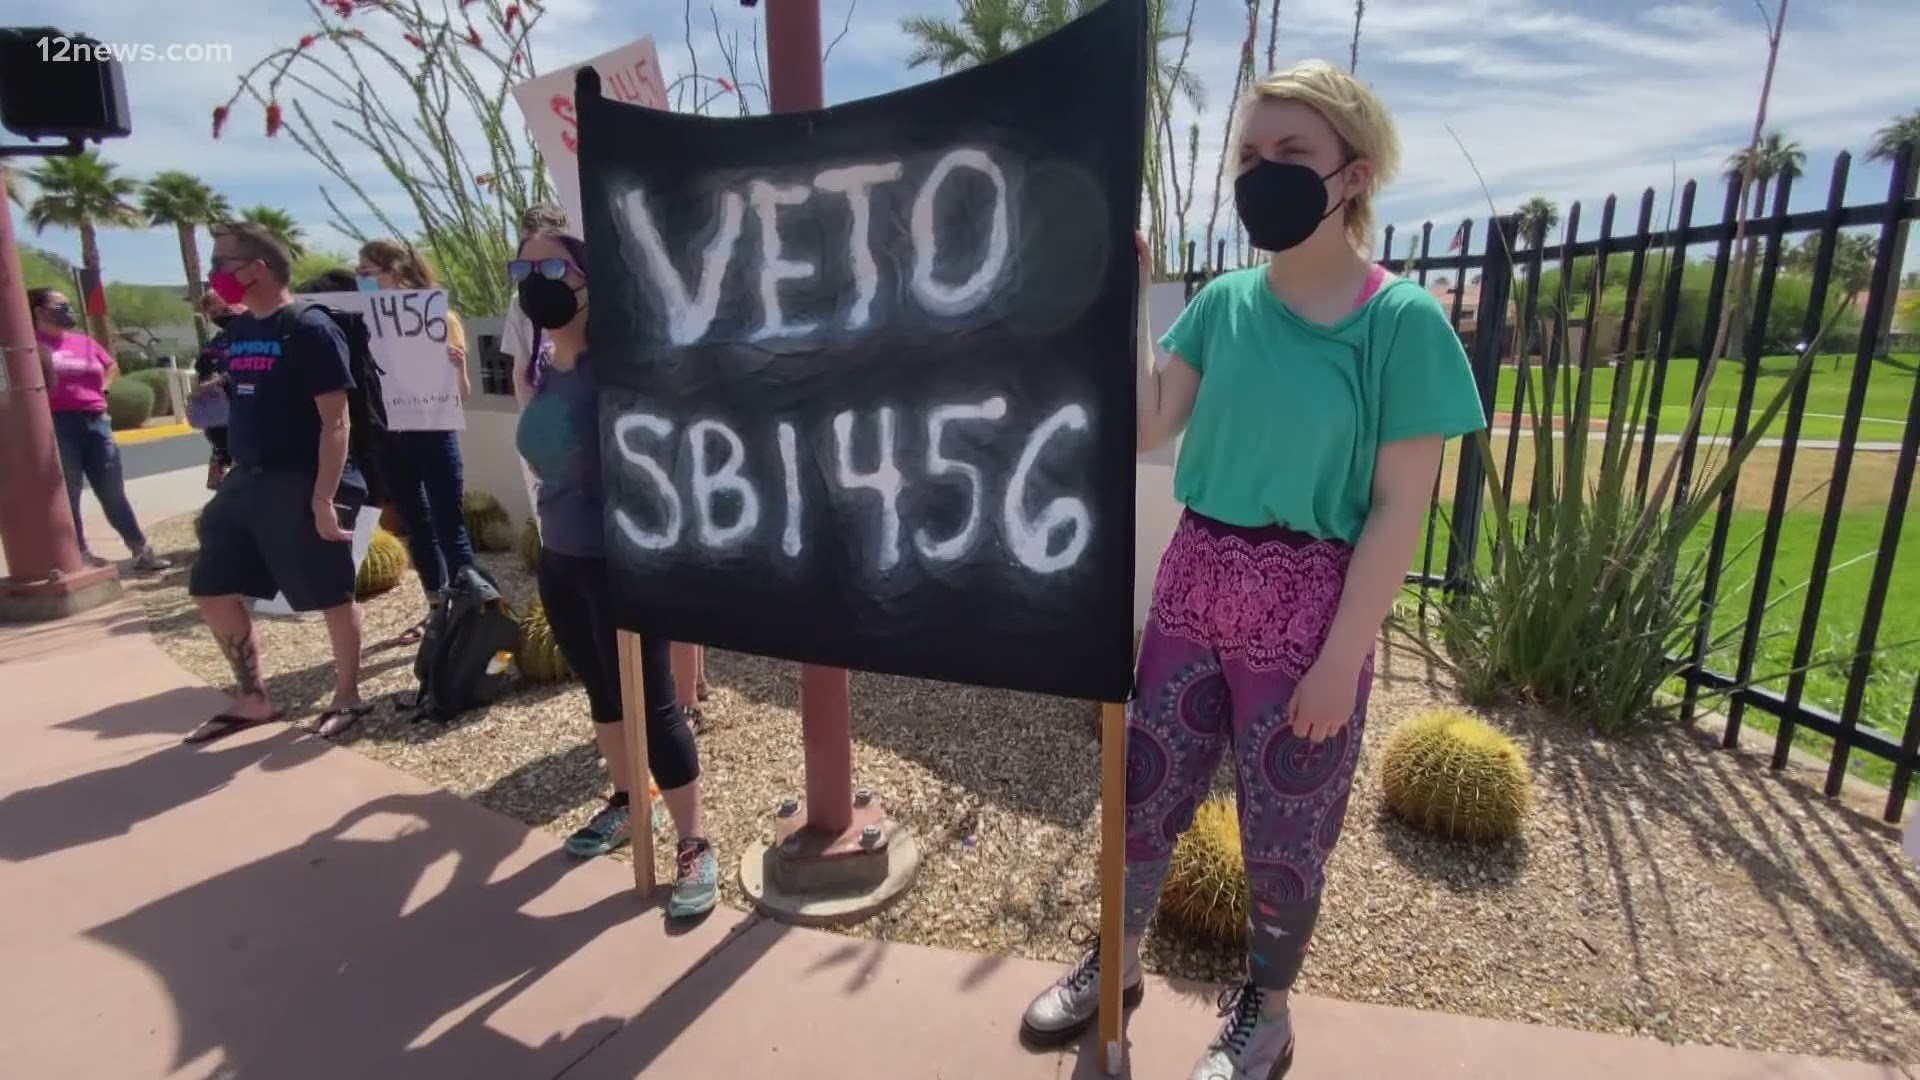 Arizona lawmakers approved a sex-ed bill, SB 1456, that would require schools to get parents' permission for discussion about gender identity and sexual orientation.